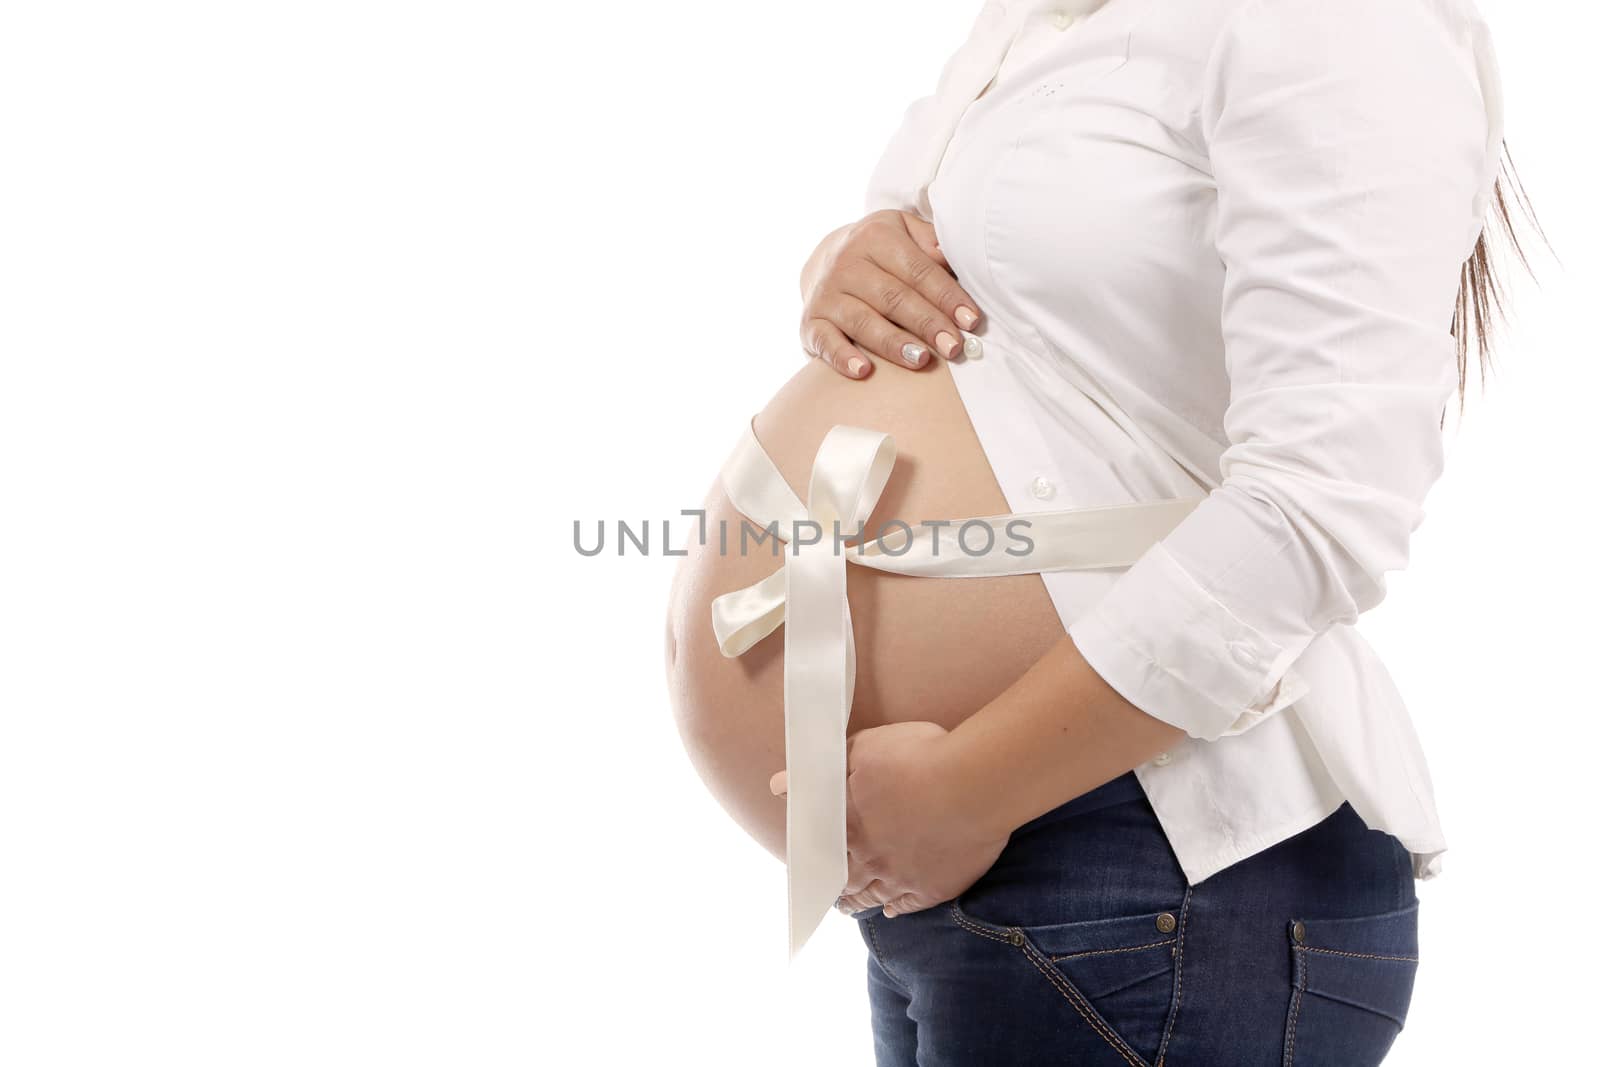 Belly of pregnant woman. There is space for text